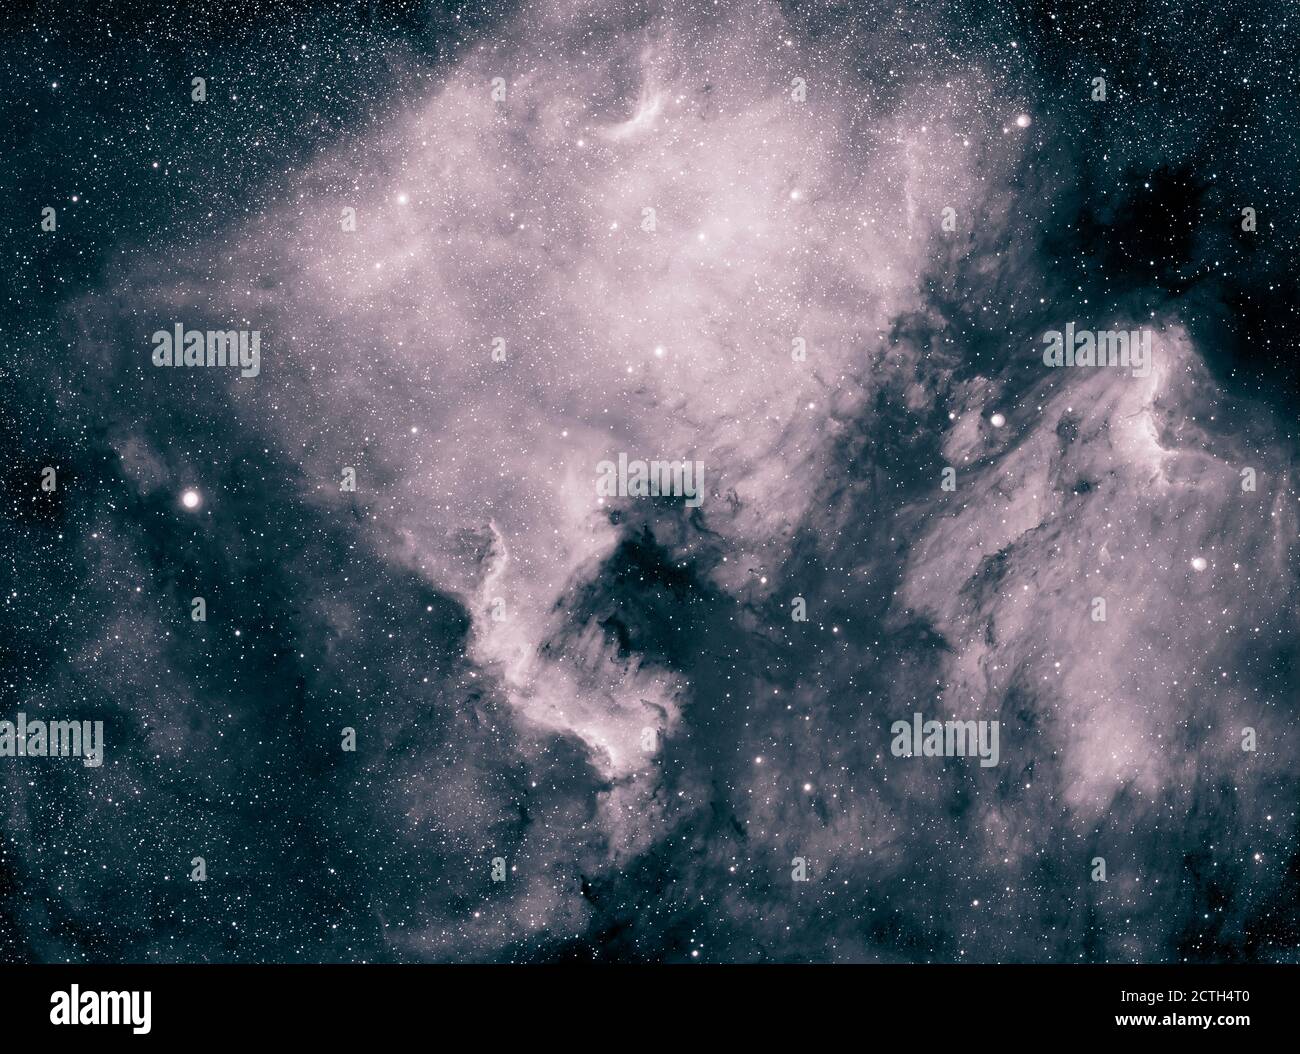 The vast North America Nebula, NGC 7000 in the constellation Cygnus, an emission nebula photographed in monochrome hydrogen alpha and 2,500 light years from Earth. The area below and to left of the ‘gulf’ is the Cygnus Wall and separate nebula cloud to right, separated by interstellar dust, is the Pelican Nebula, IC 5070. Long exposure photograph from London, UK with narrowband Ha filter on Atik 11000 large format ccd camera. Credit: Malcolm Park/Alamy. Stock Photo